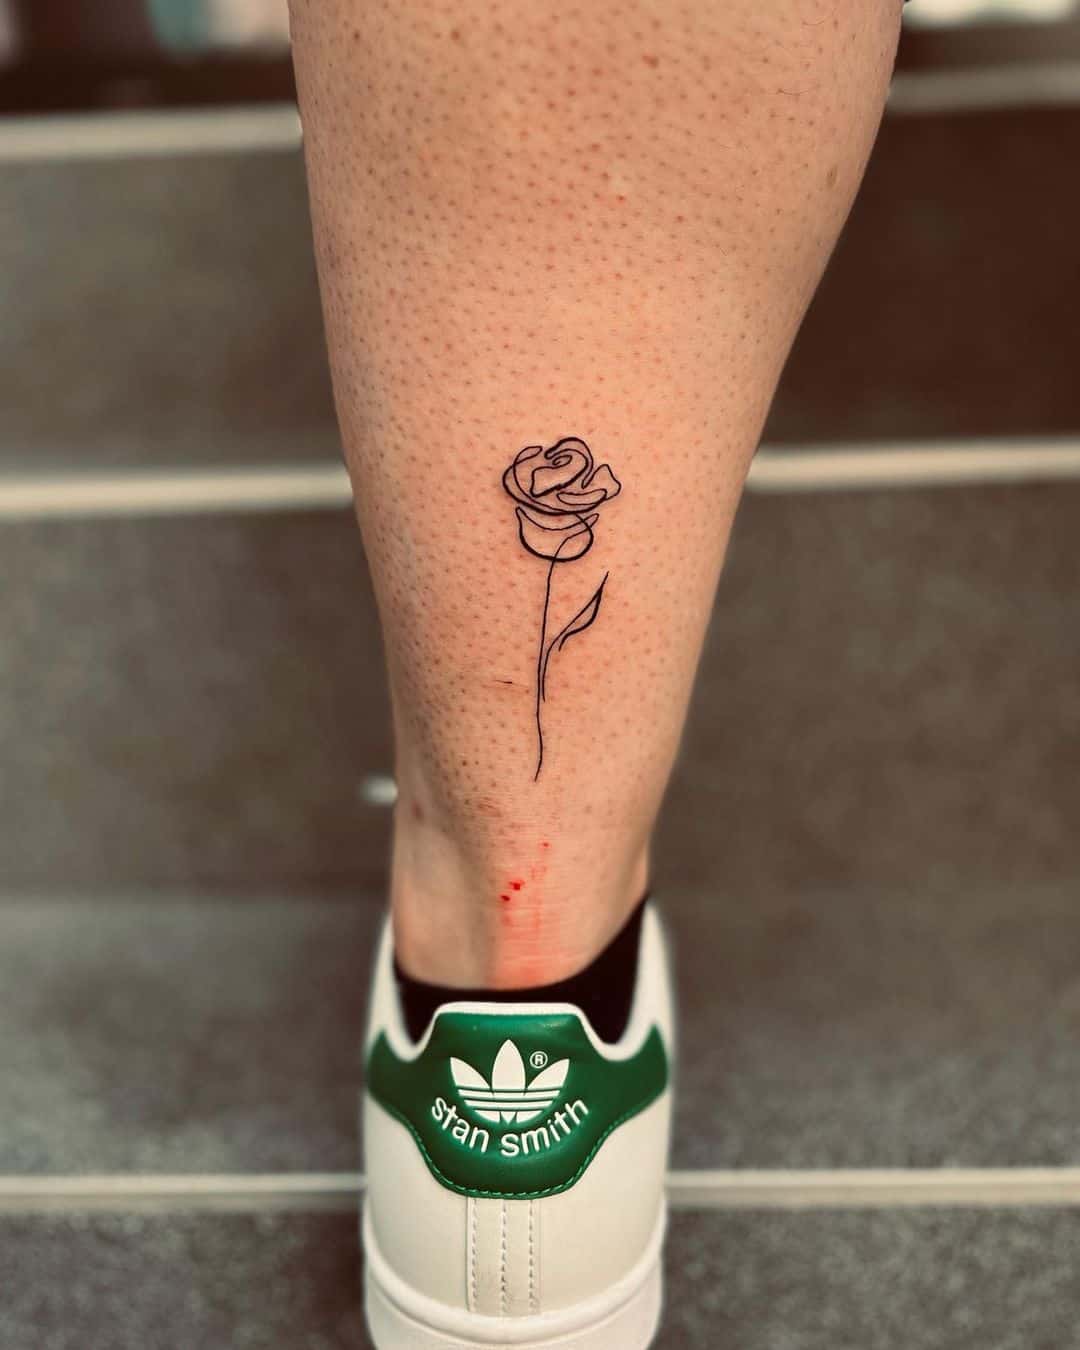 10 Minimalist Tattoo Designs For Your First Tattoo - Society19 UK